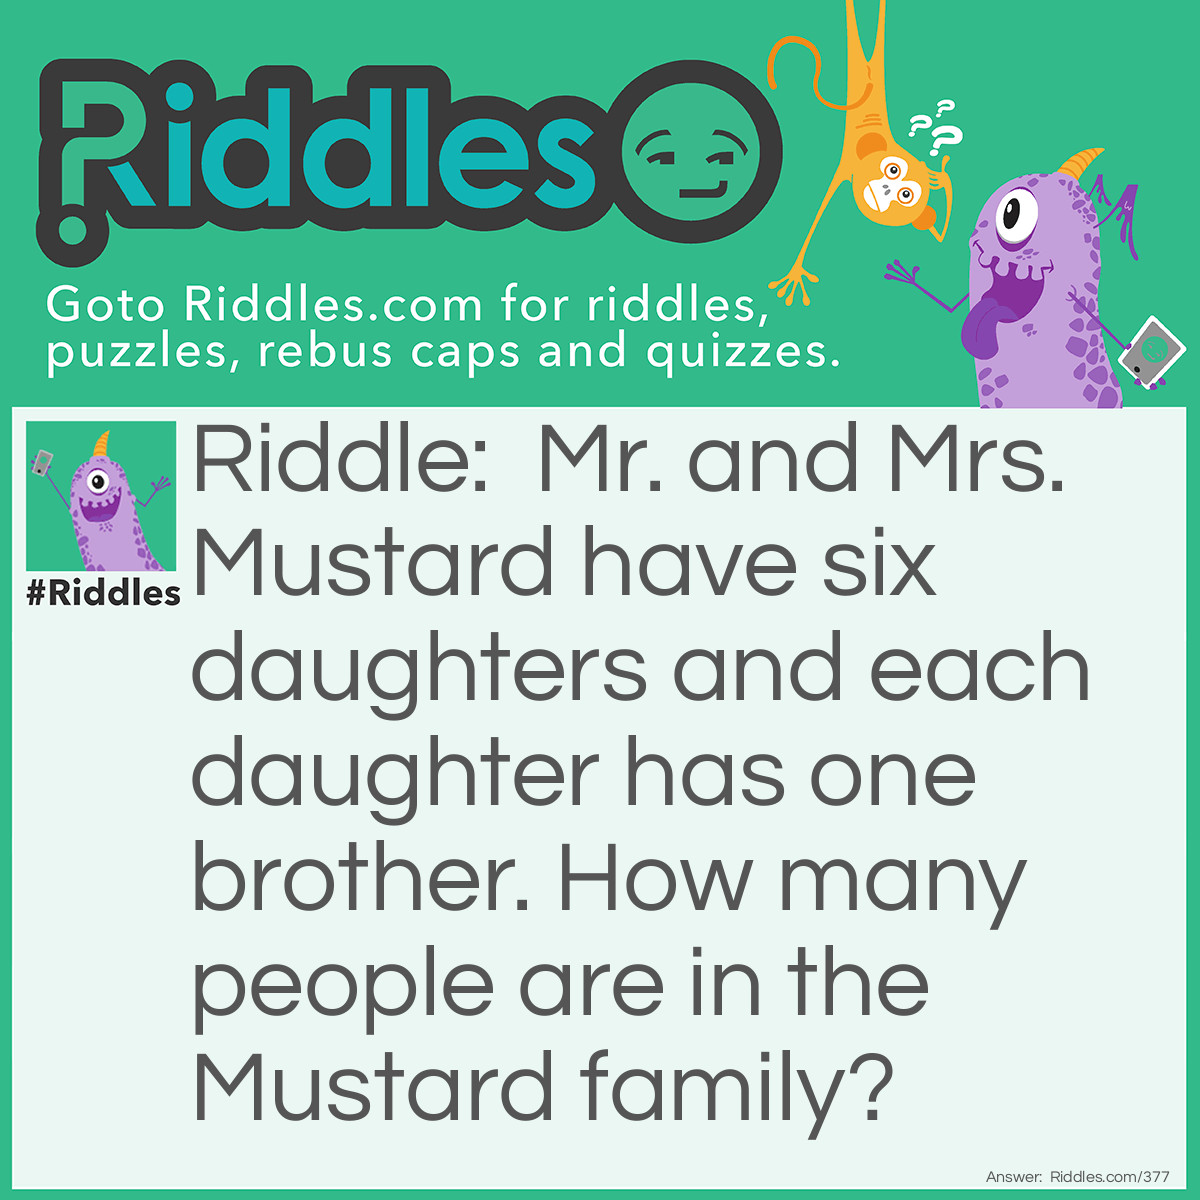 Riddle: Mr. and Mrs. Mustard have six daughters and each daughter has one brother. How many people are in the Mustard family? Answer: There are nine Mustards in the family. Since each daughter shares the same brother, there are six girls, one boy, and Mr. and Mrs. Mustard.